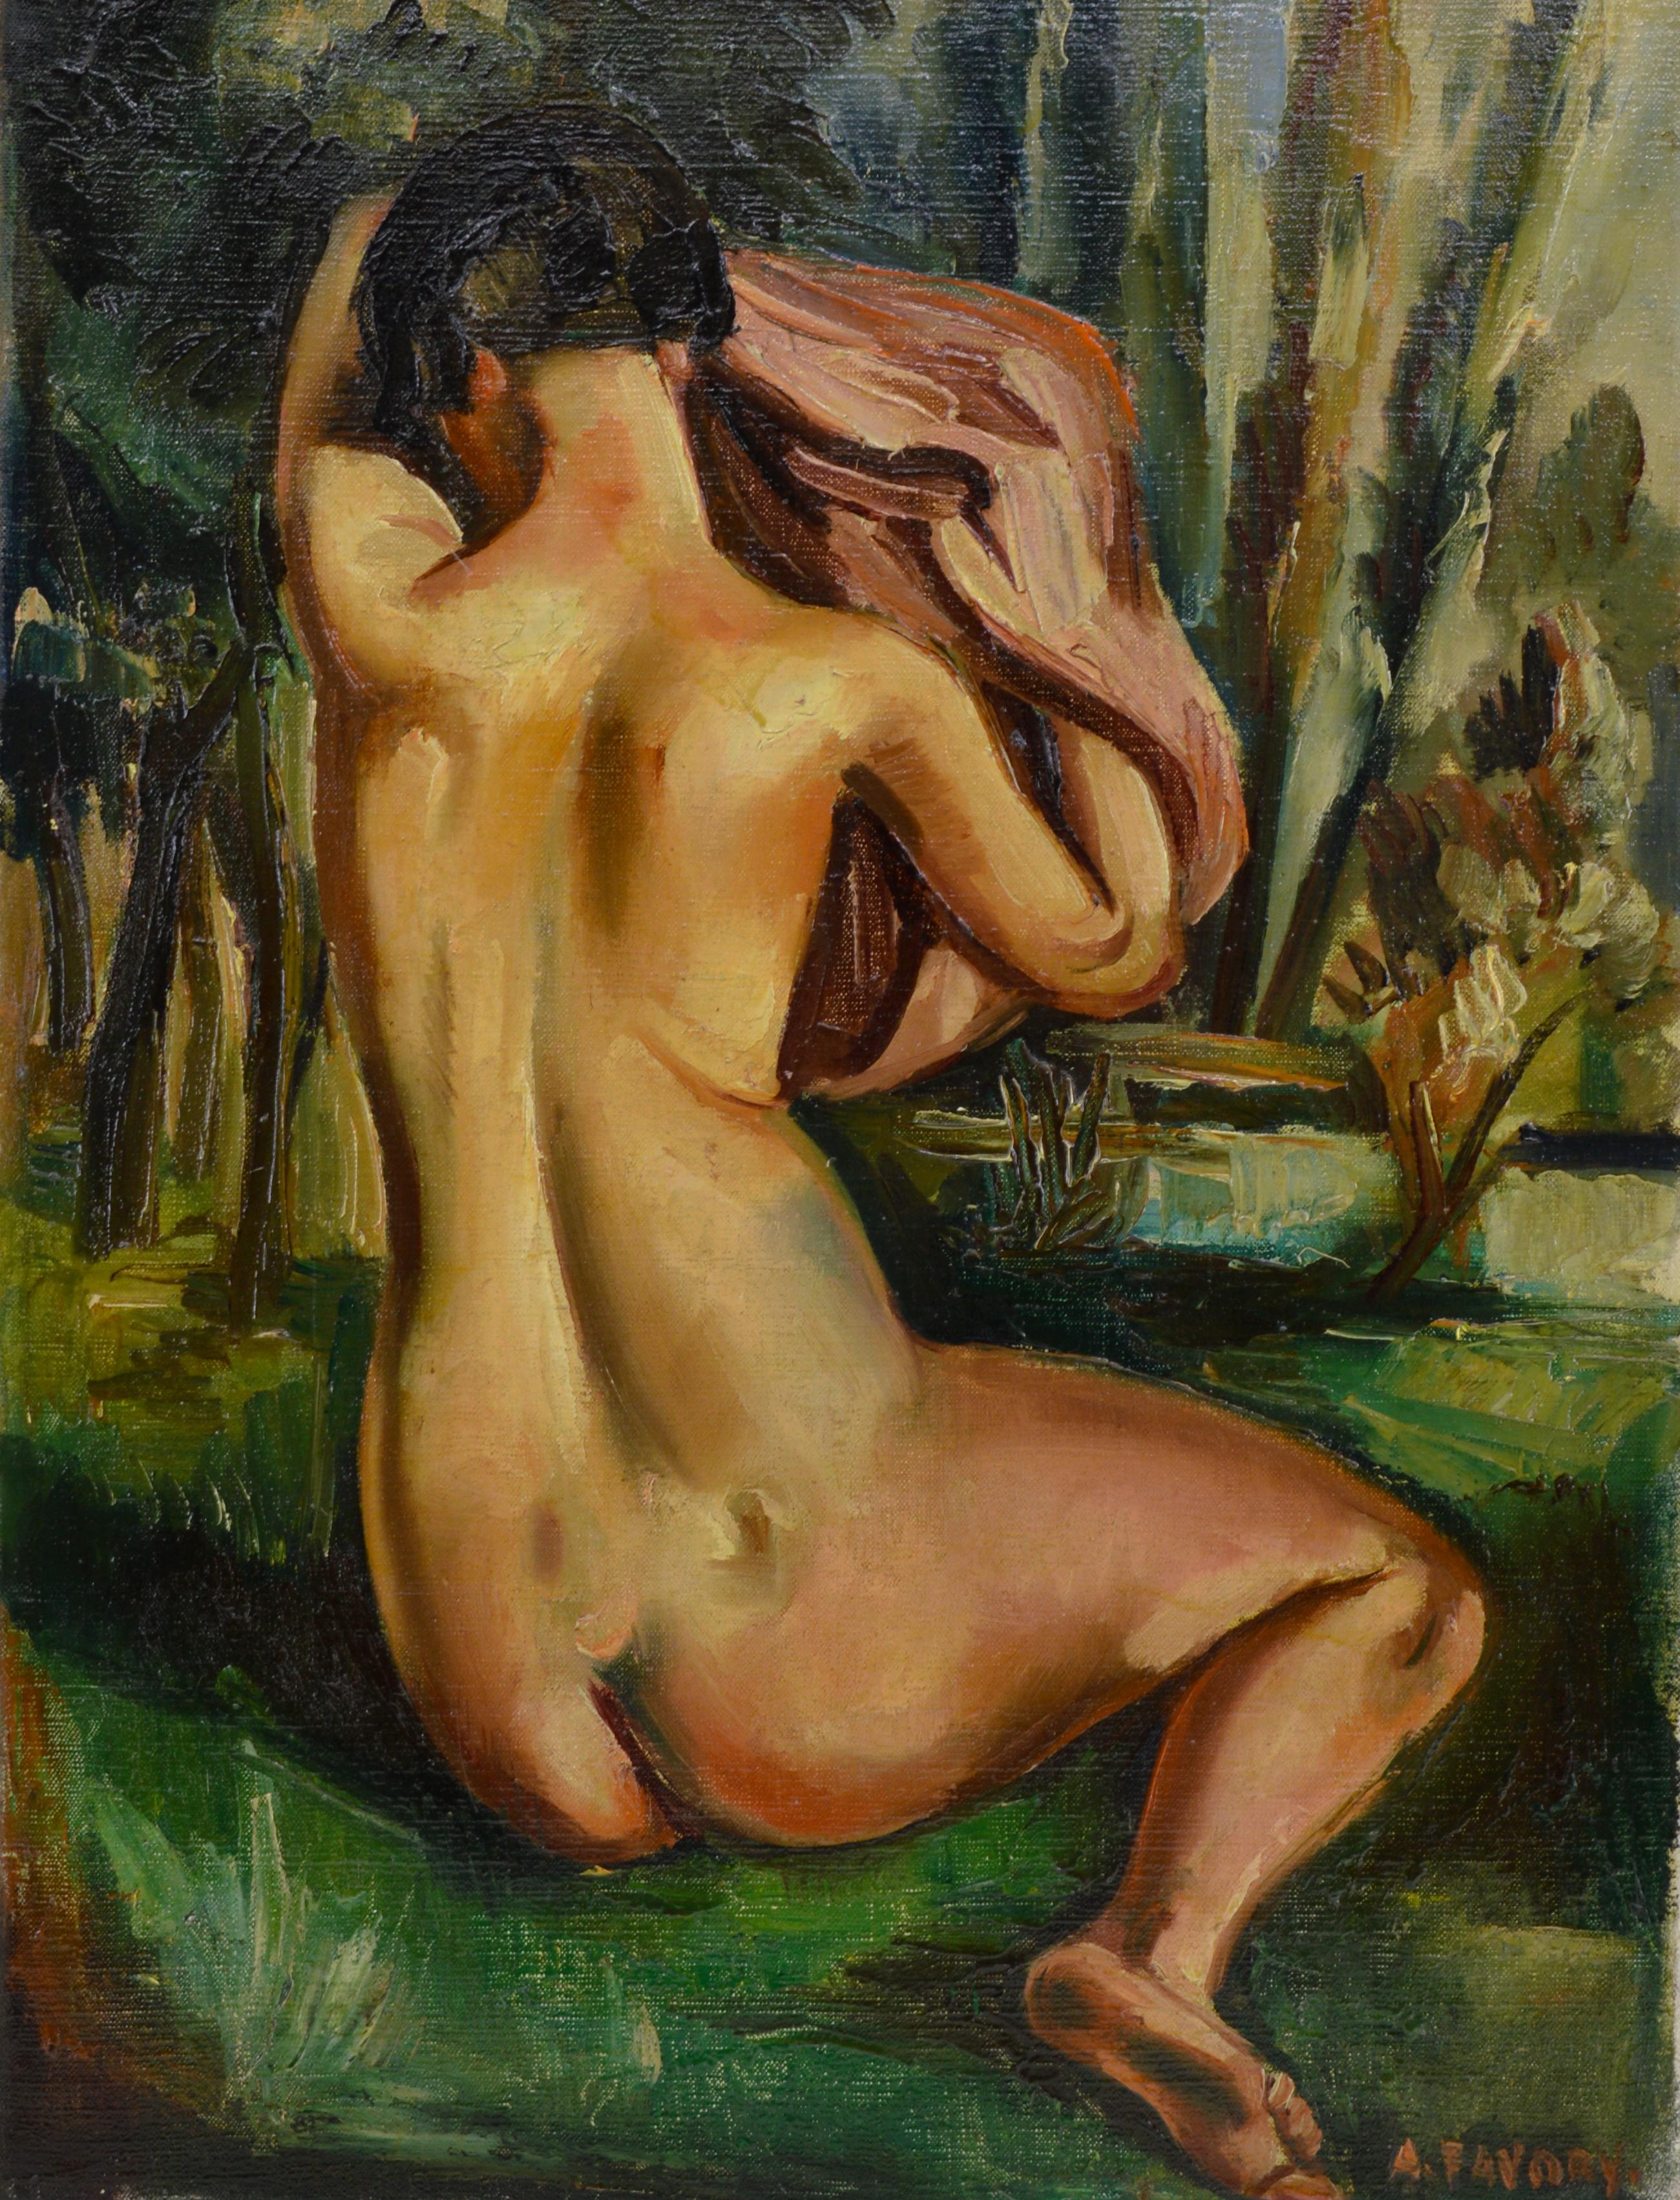 Andre Favory, Nude - Painting by André Favory